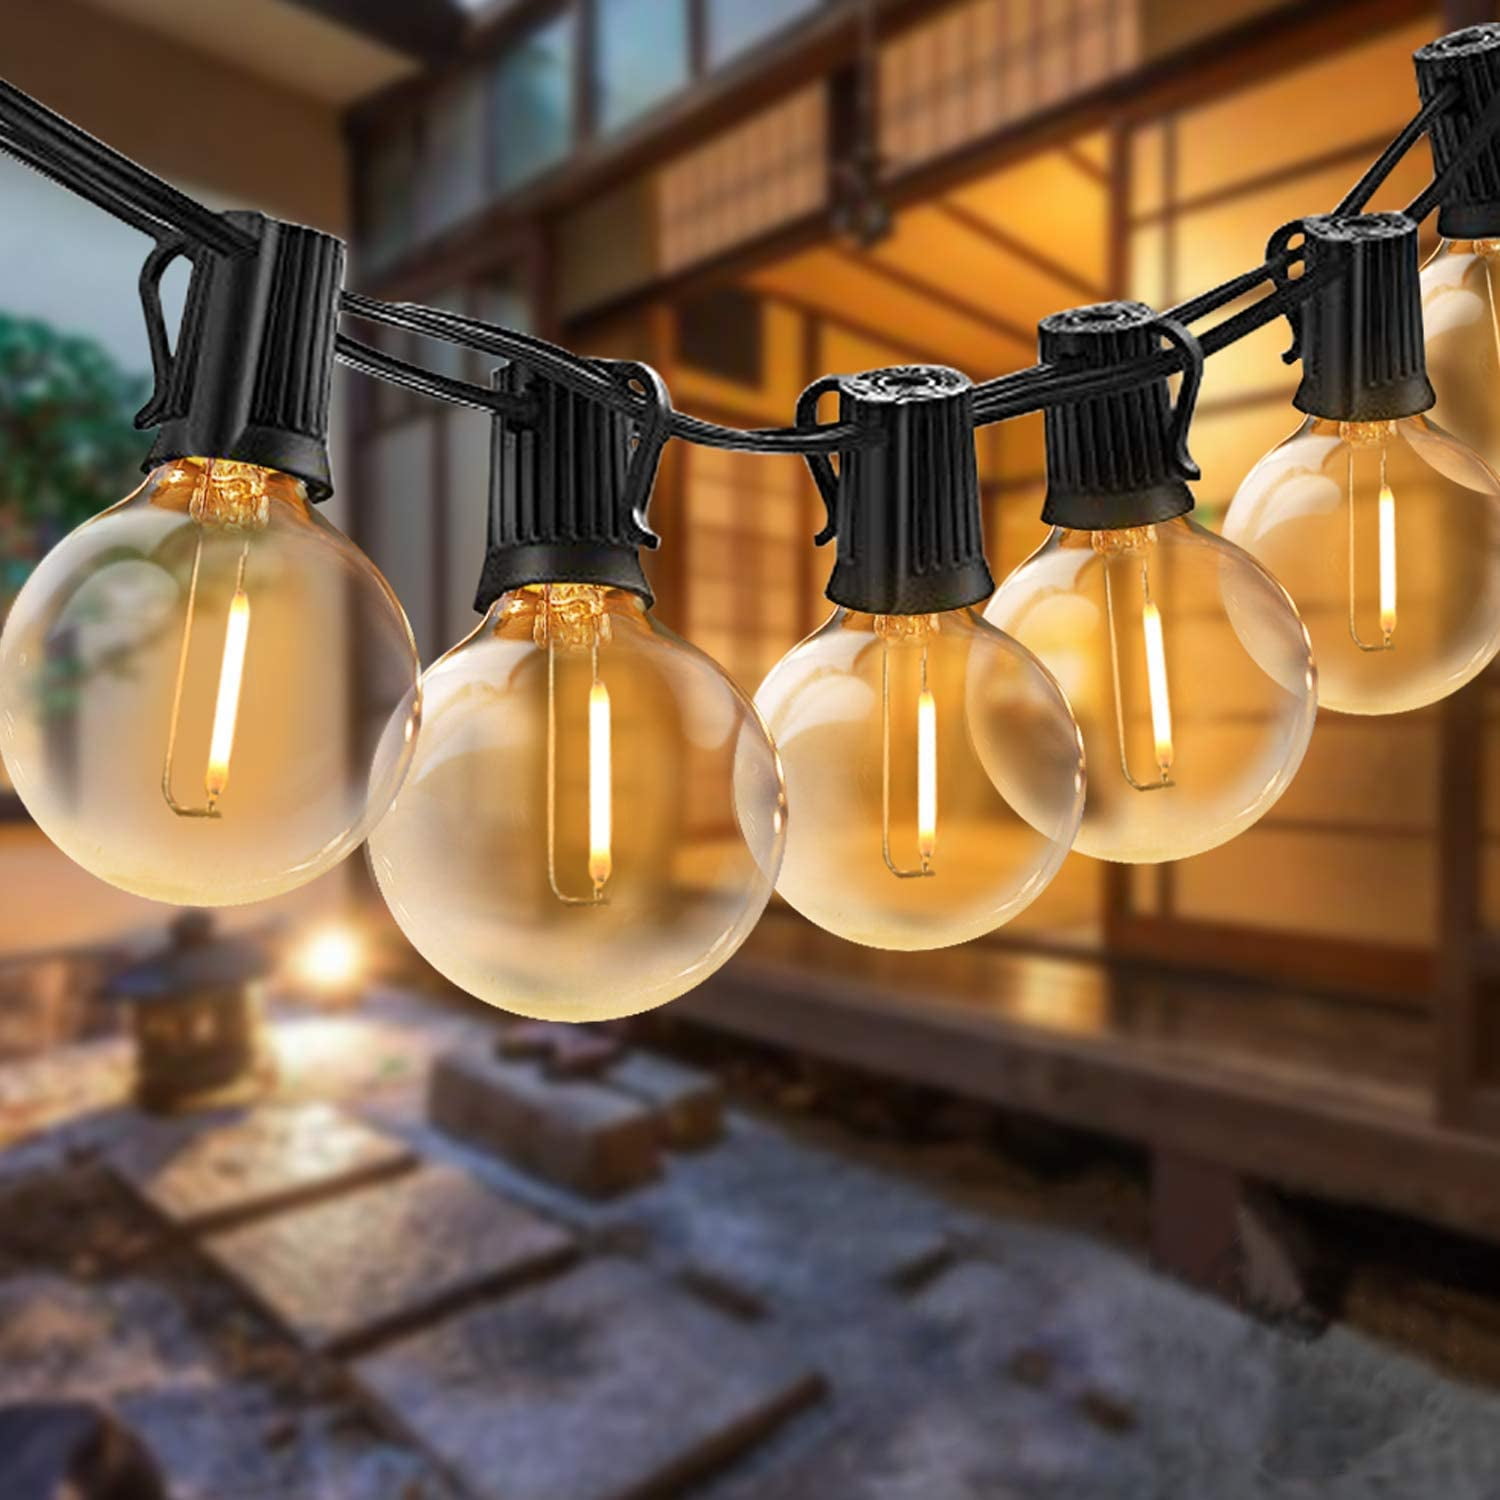 Waterproof 10m 100 String Light Clips Lights With Options For Outdoor  Holiday Decorations, Parties, And Gardens From Leeu, $3.52